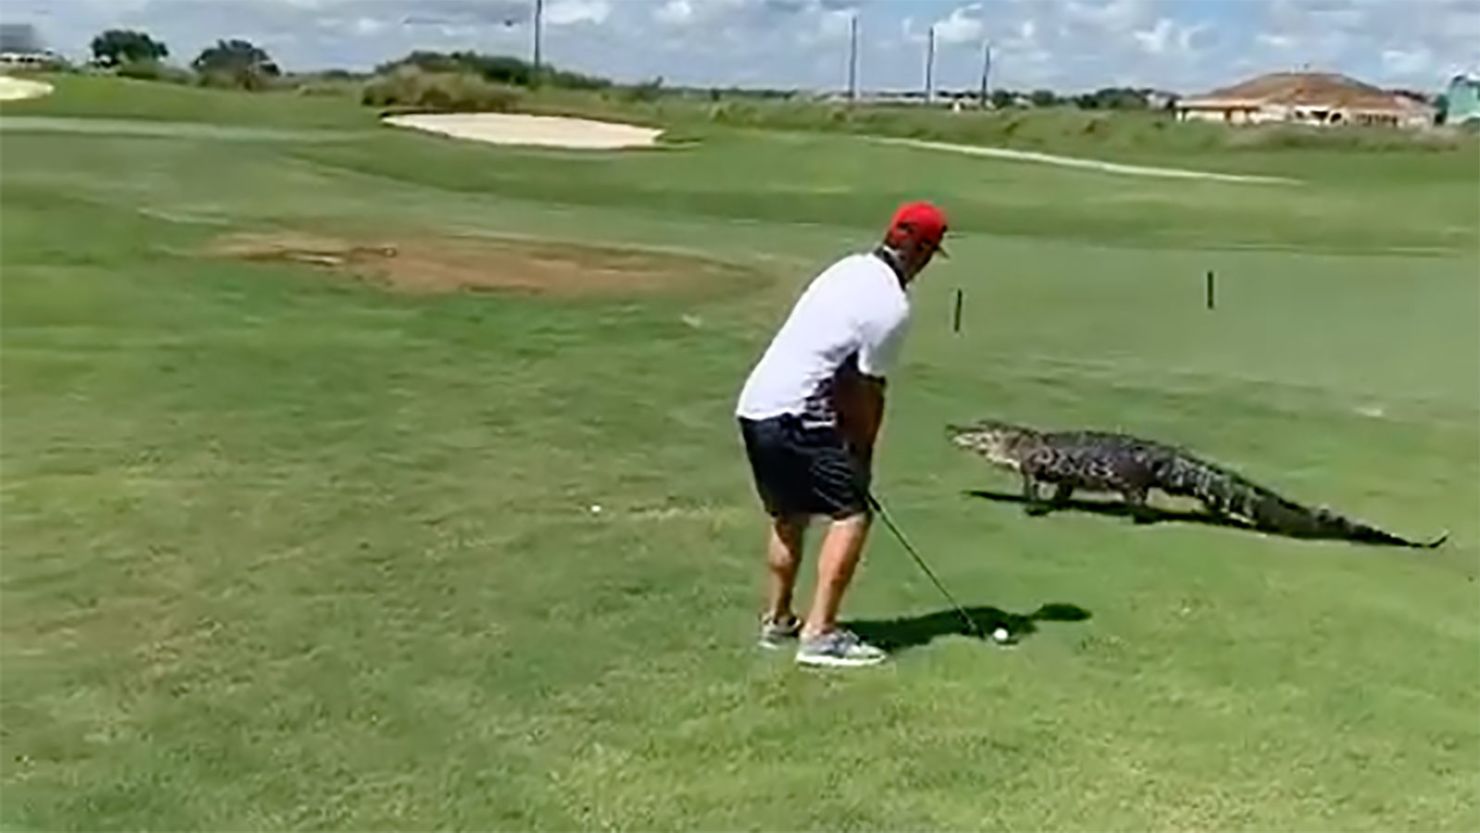 Florida: Where making your shot on the links won't be derailed by anything